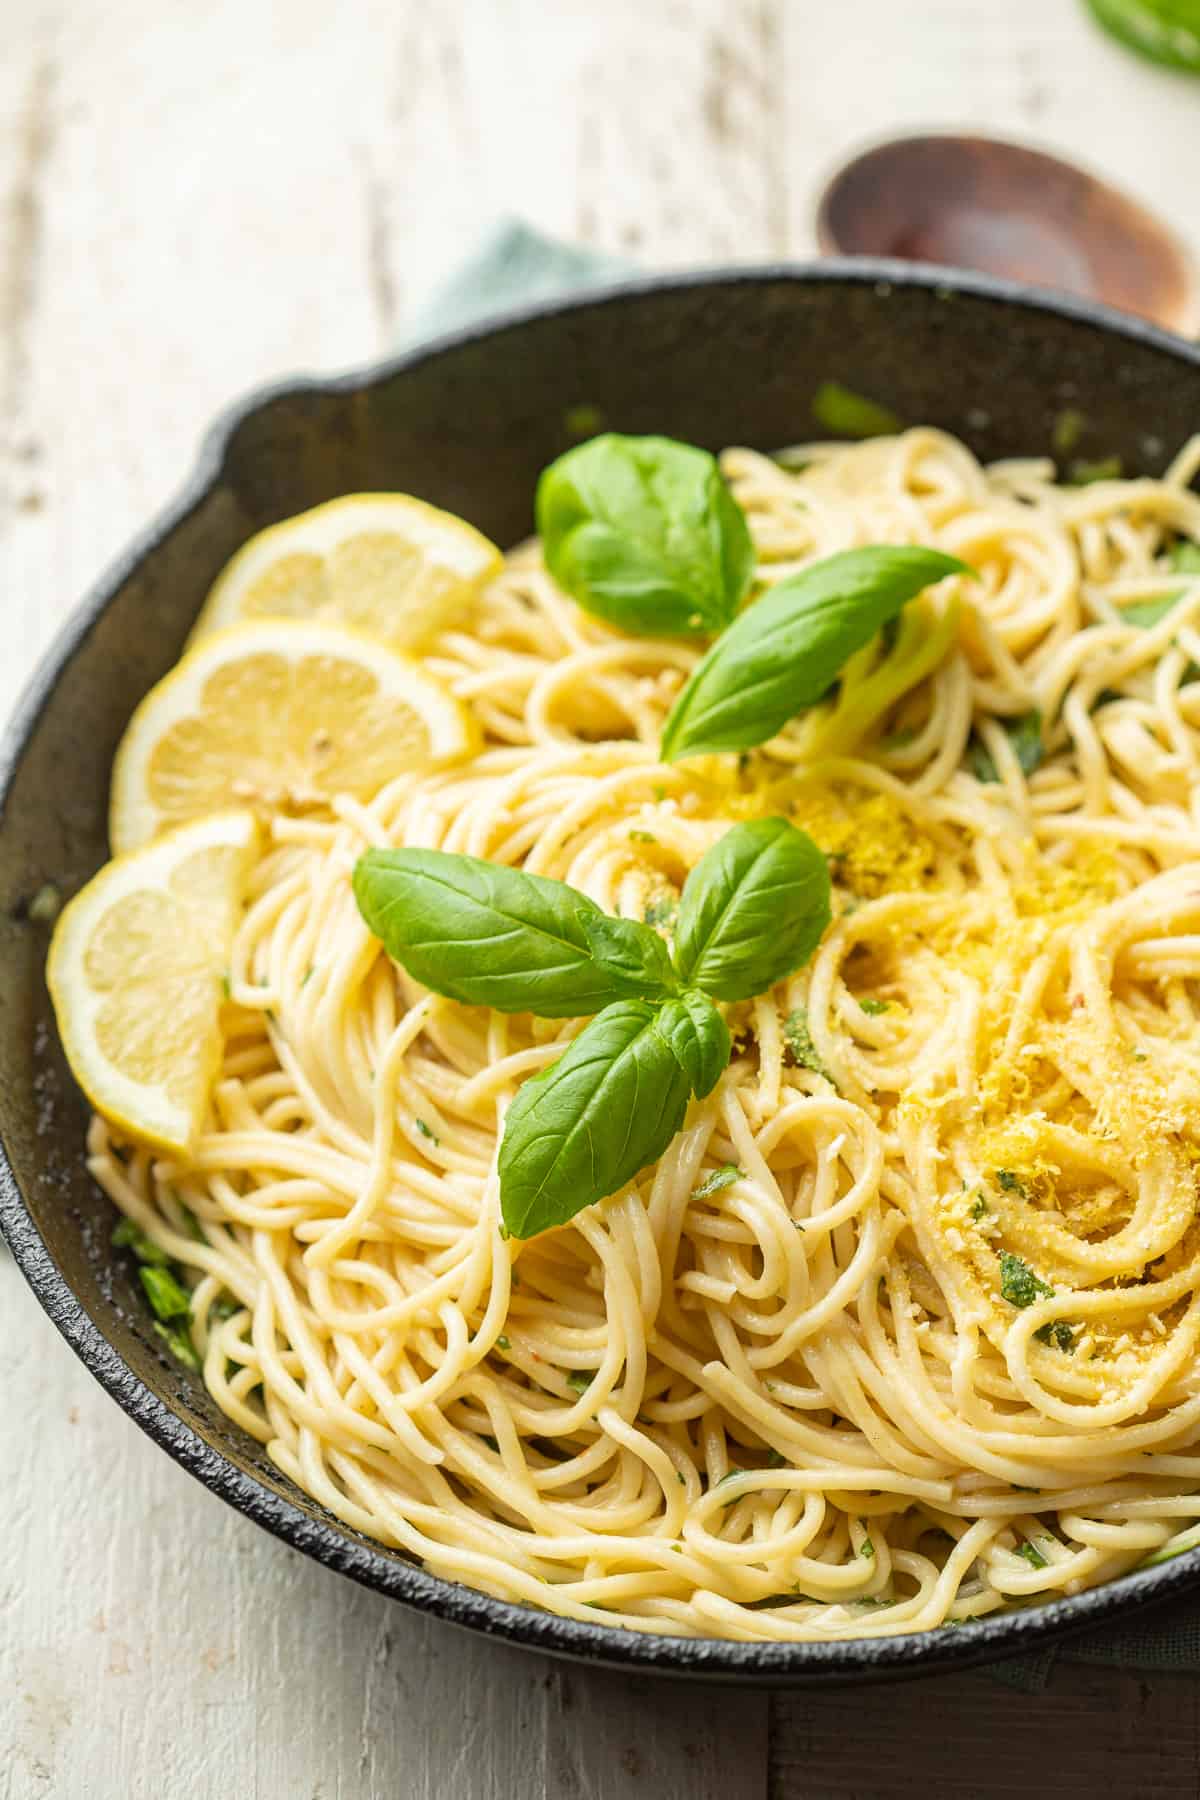 Skillet of Lemon Pasta with wooden spoon in the background.